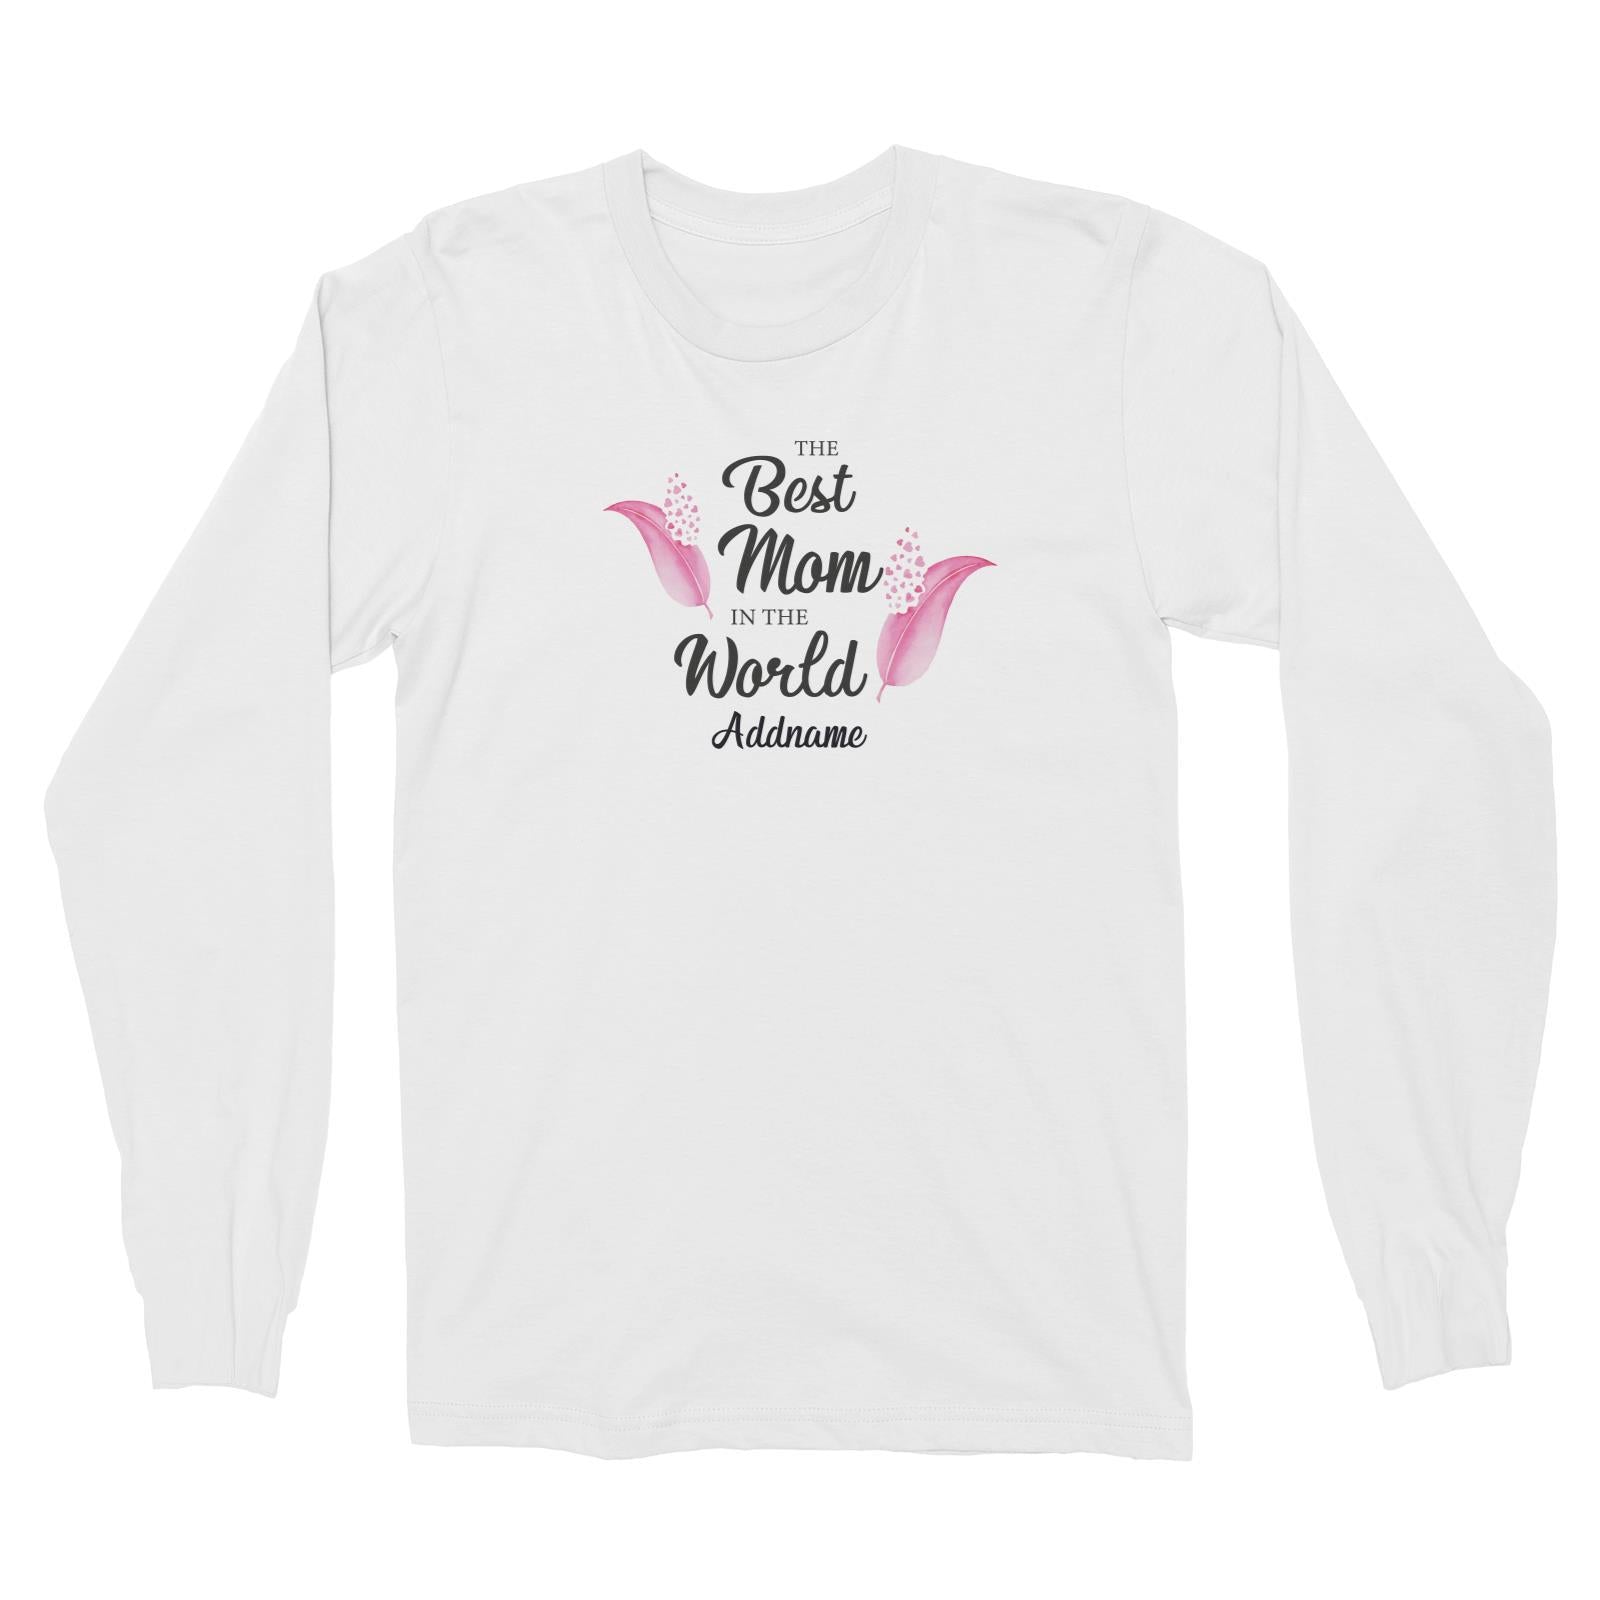 Sweet Mom Quotes 1 Love Feathers The Best Mom In The World Addname Long Sleeve Unisex T-Shirt